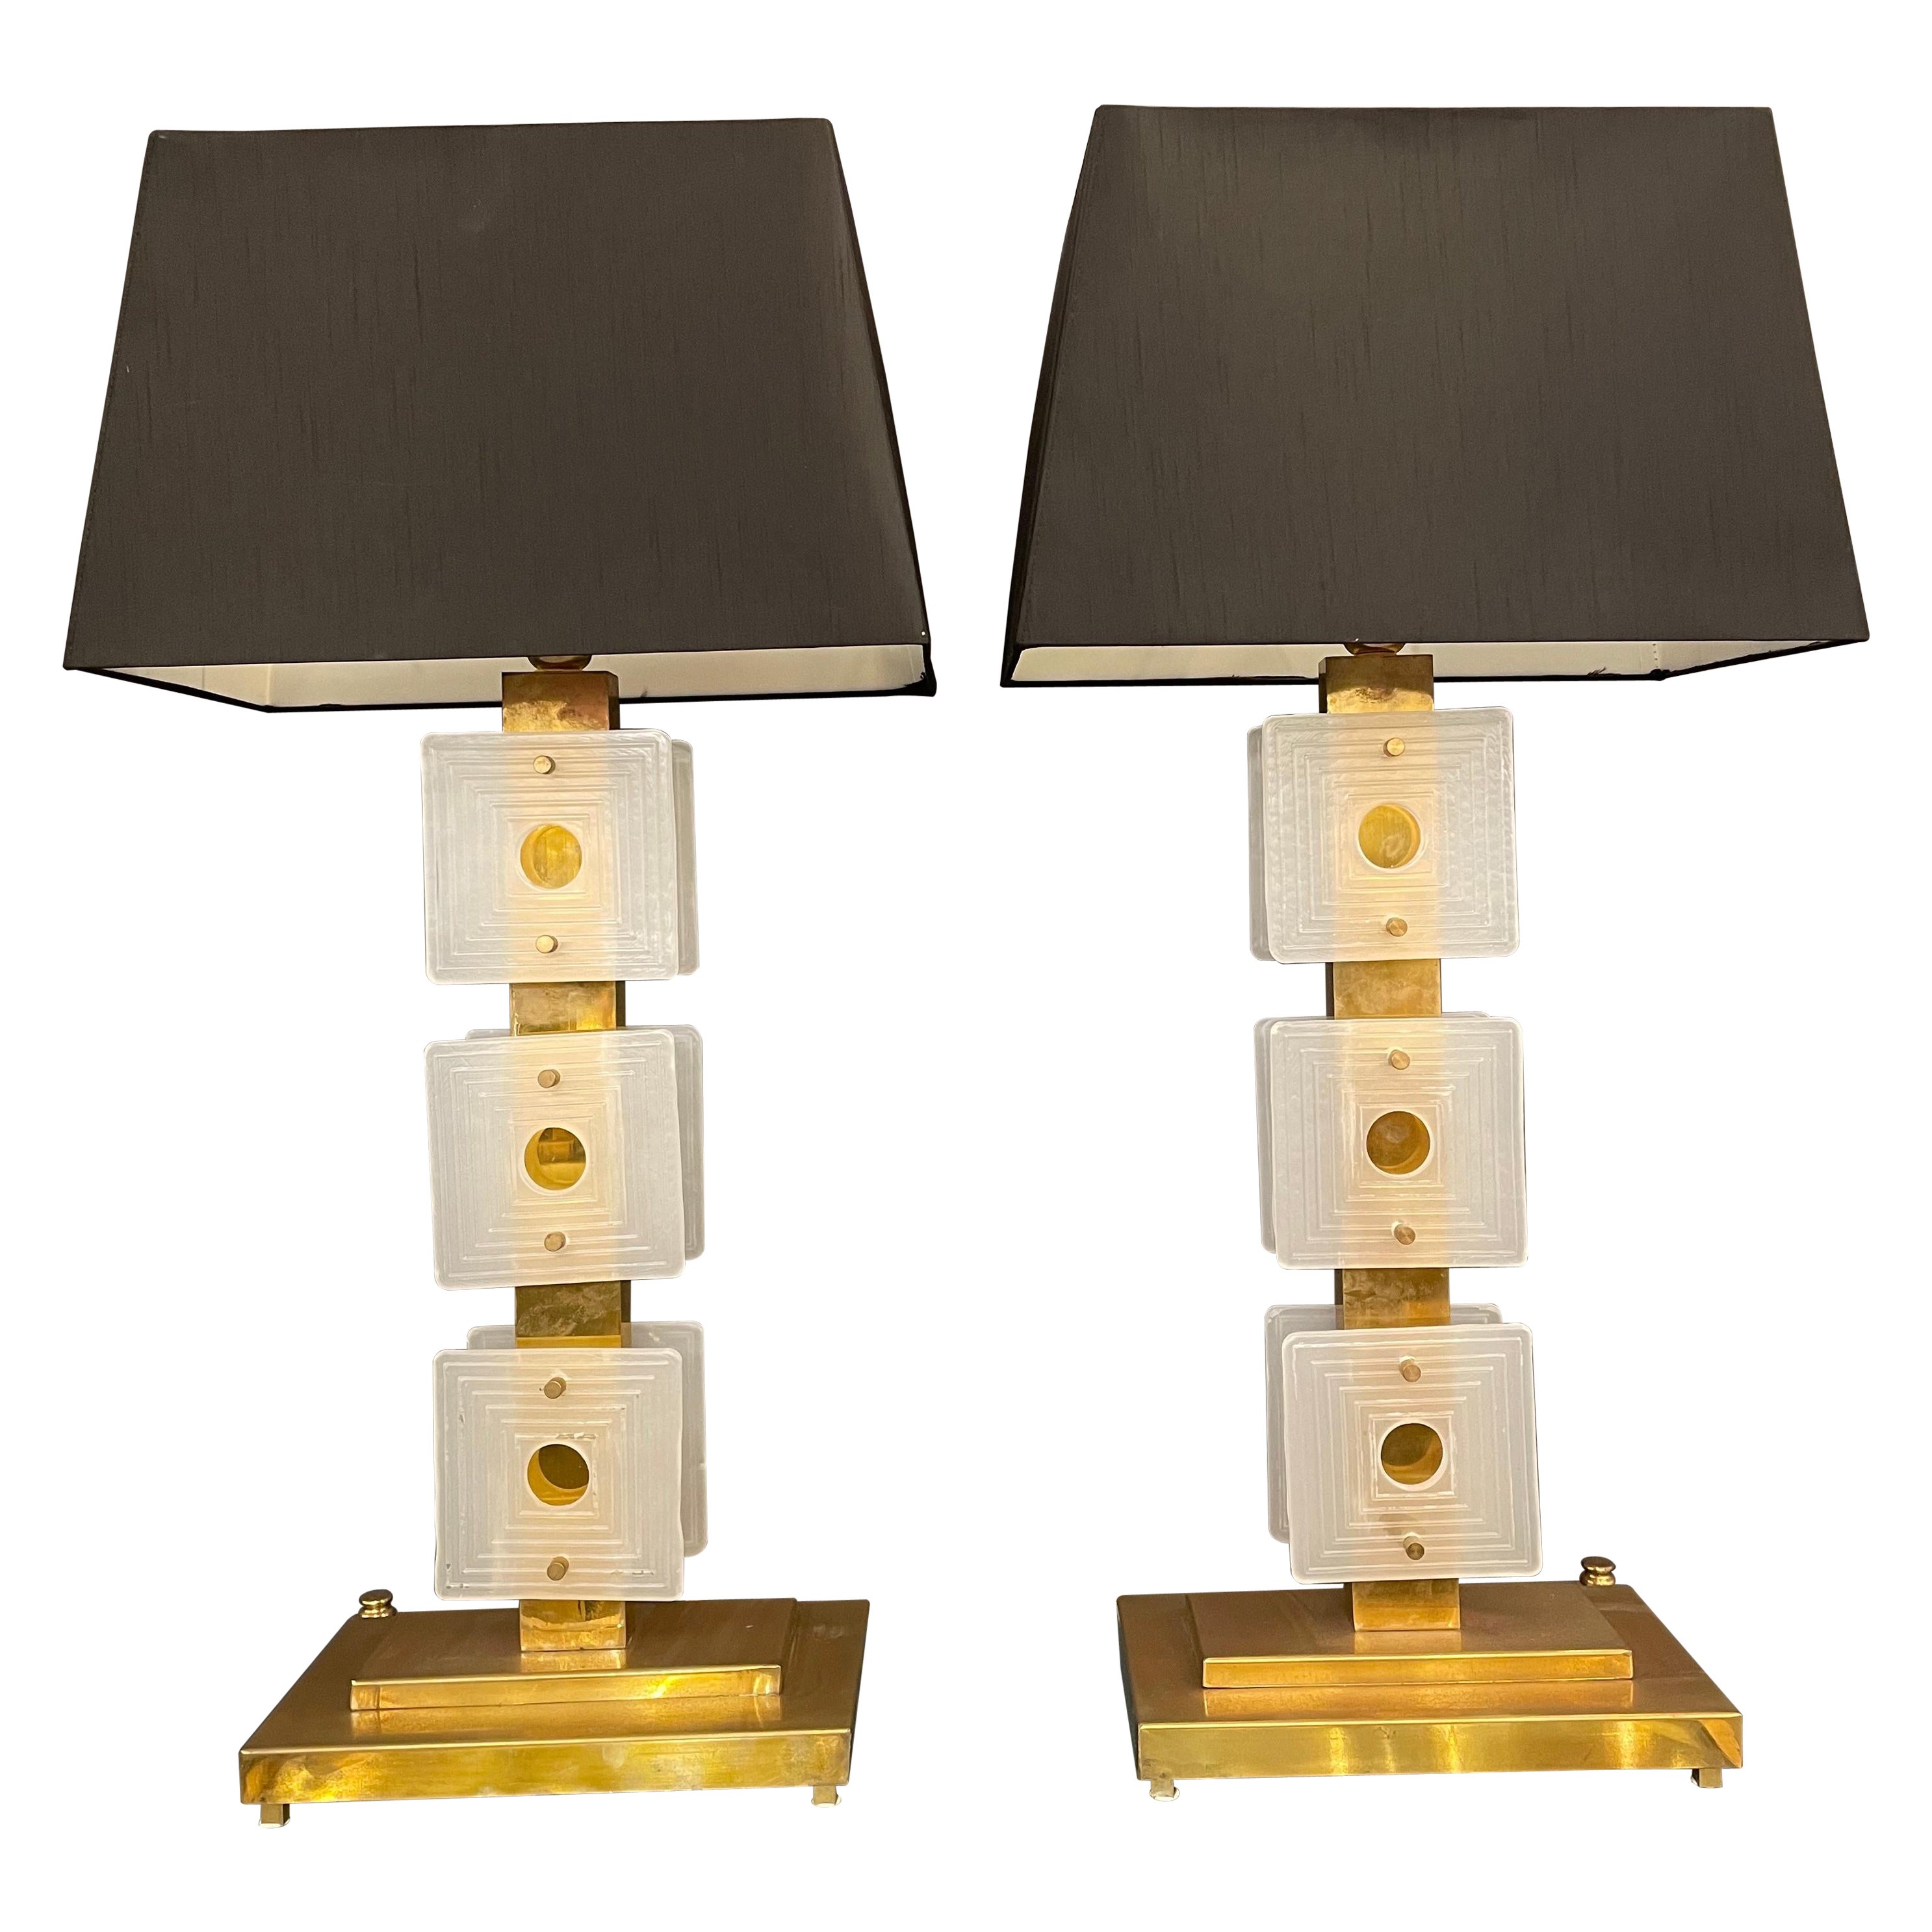 Pair of Italian Table Lamps in Brass and Murano Glass Decoration, circa 1980s